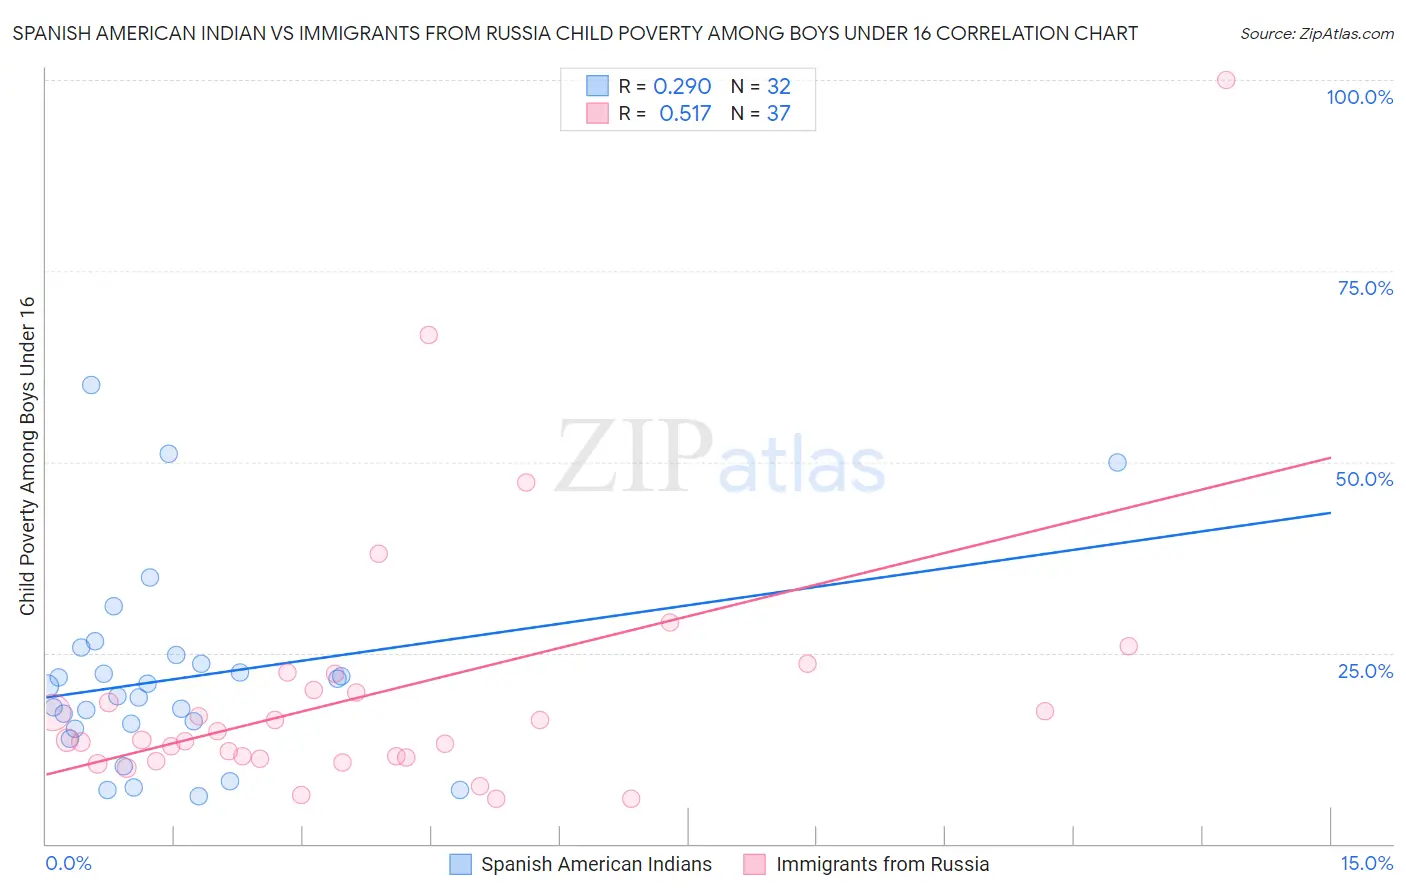 Spanish American Indian vs Immigrants from Russia Child Poverty Among Boys Under 16